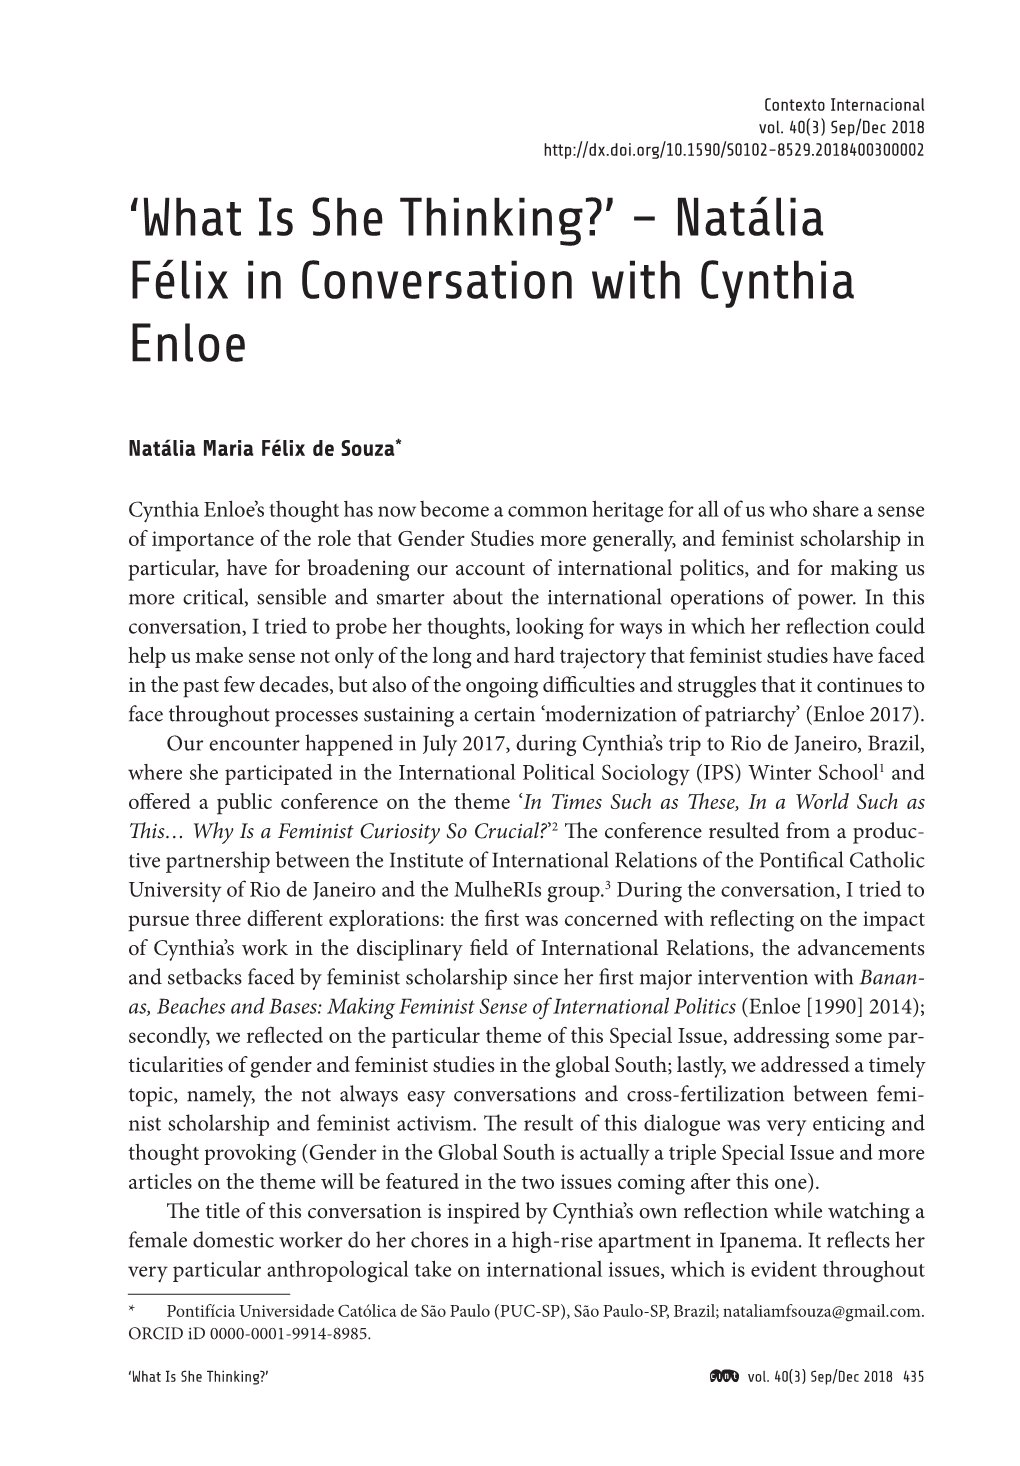 'What Is She Thinking?' – Natália Félix in Conversation with Cynthia Enloe